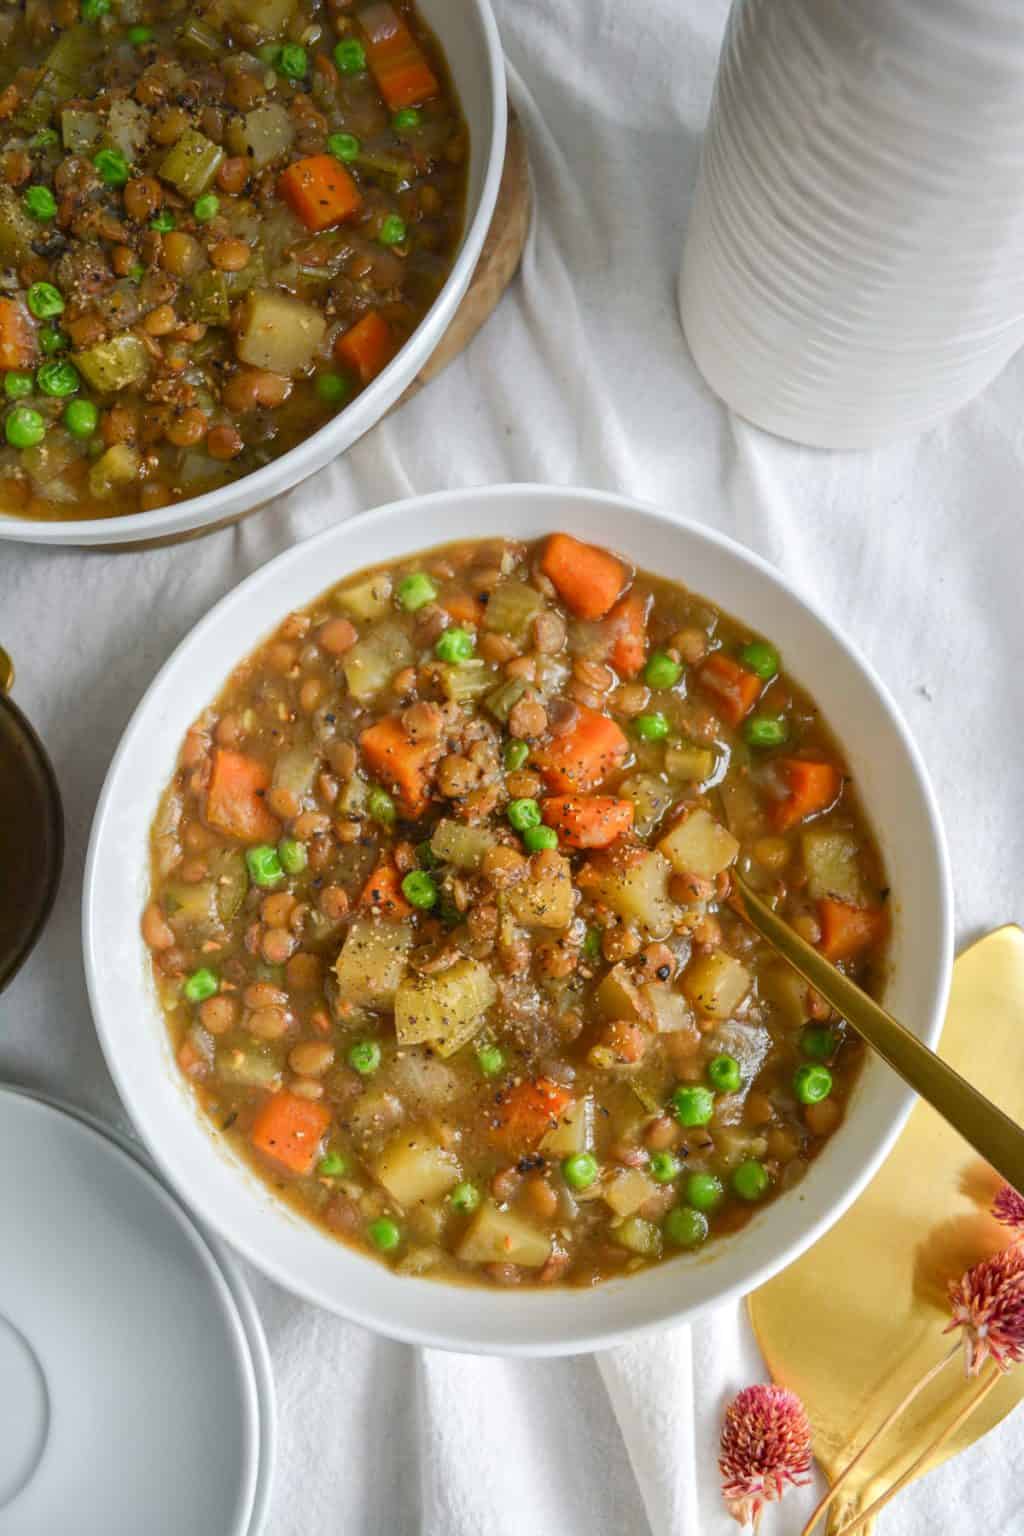 Gluten Free Instant Pot Lentil Stew - Earthly Provisions